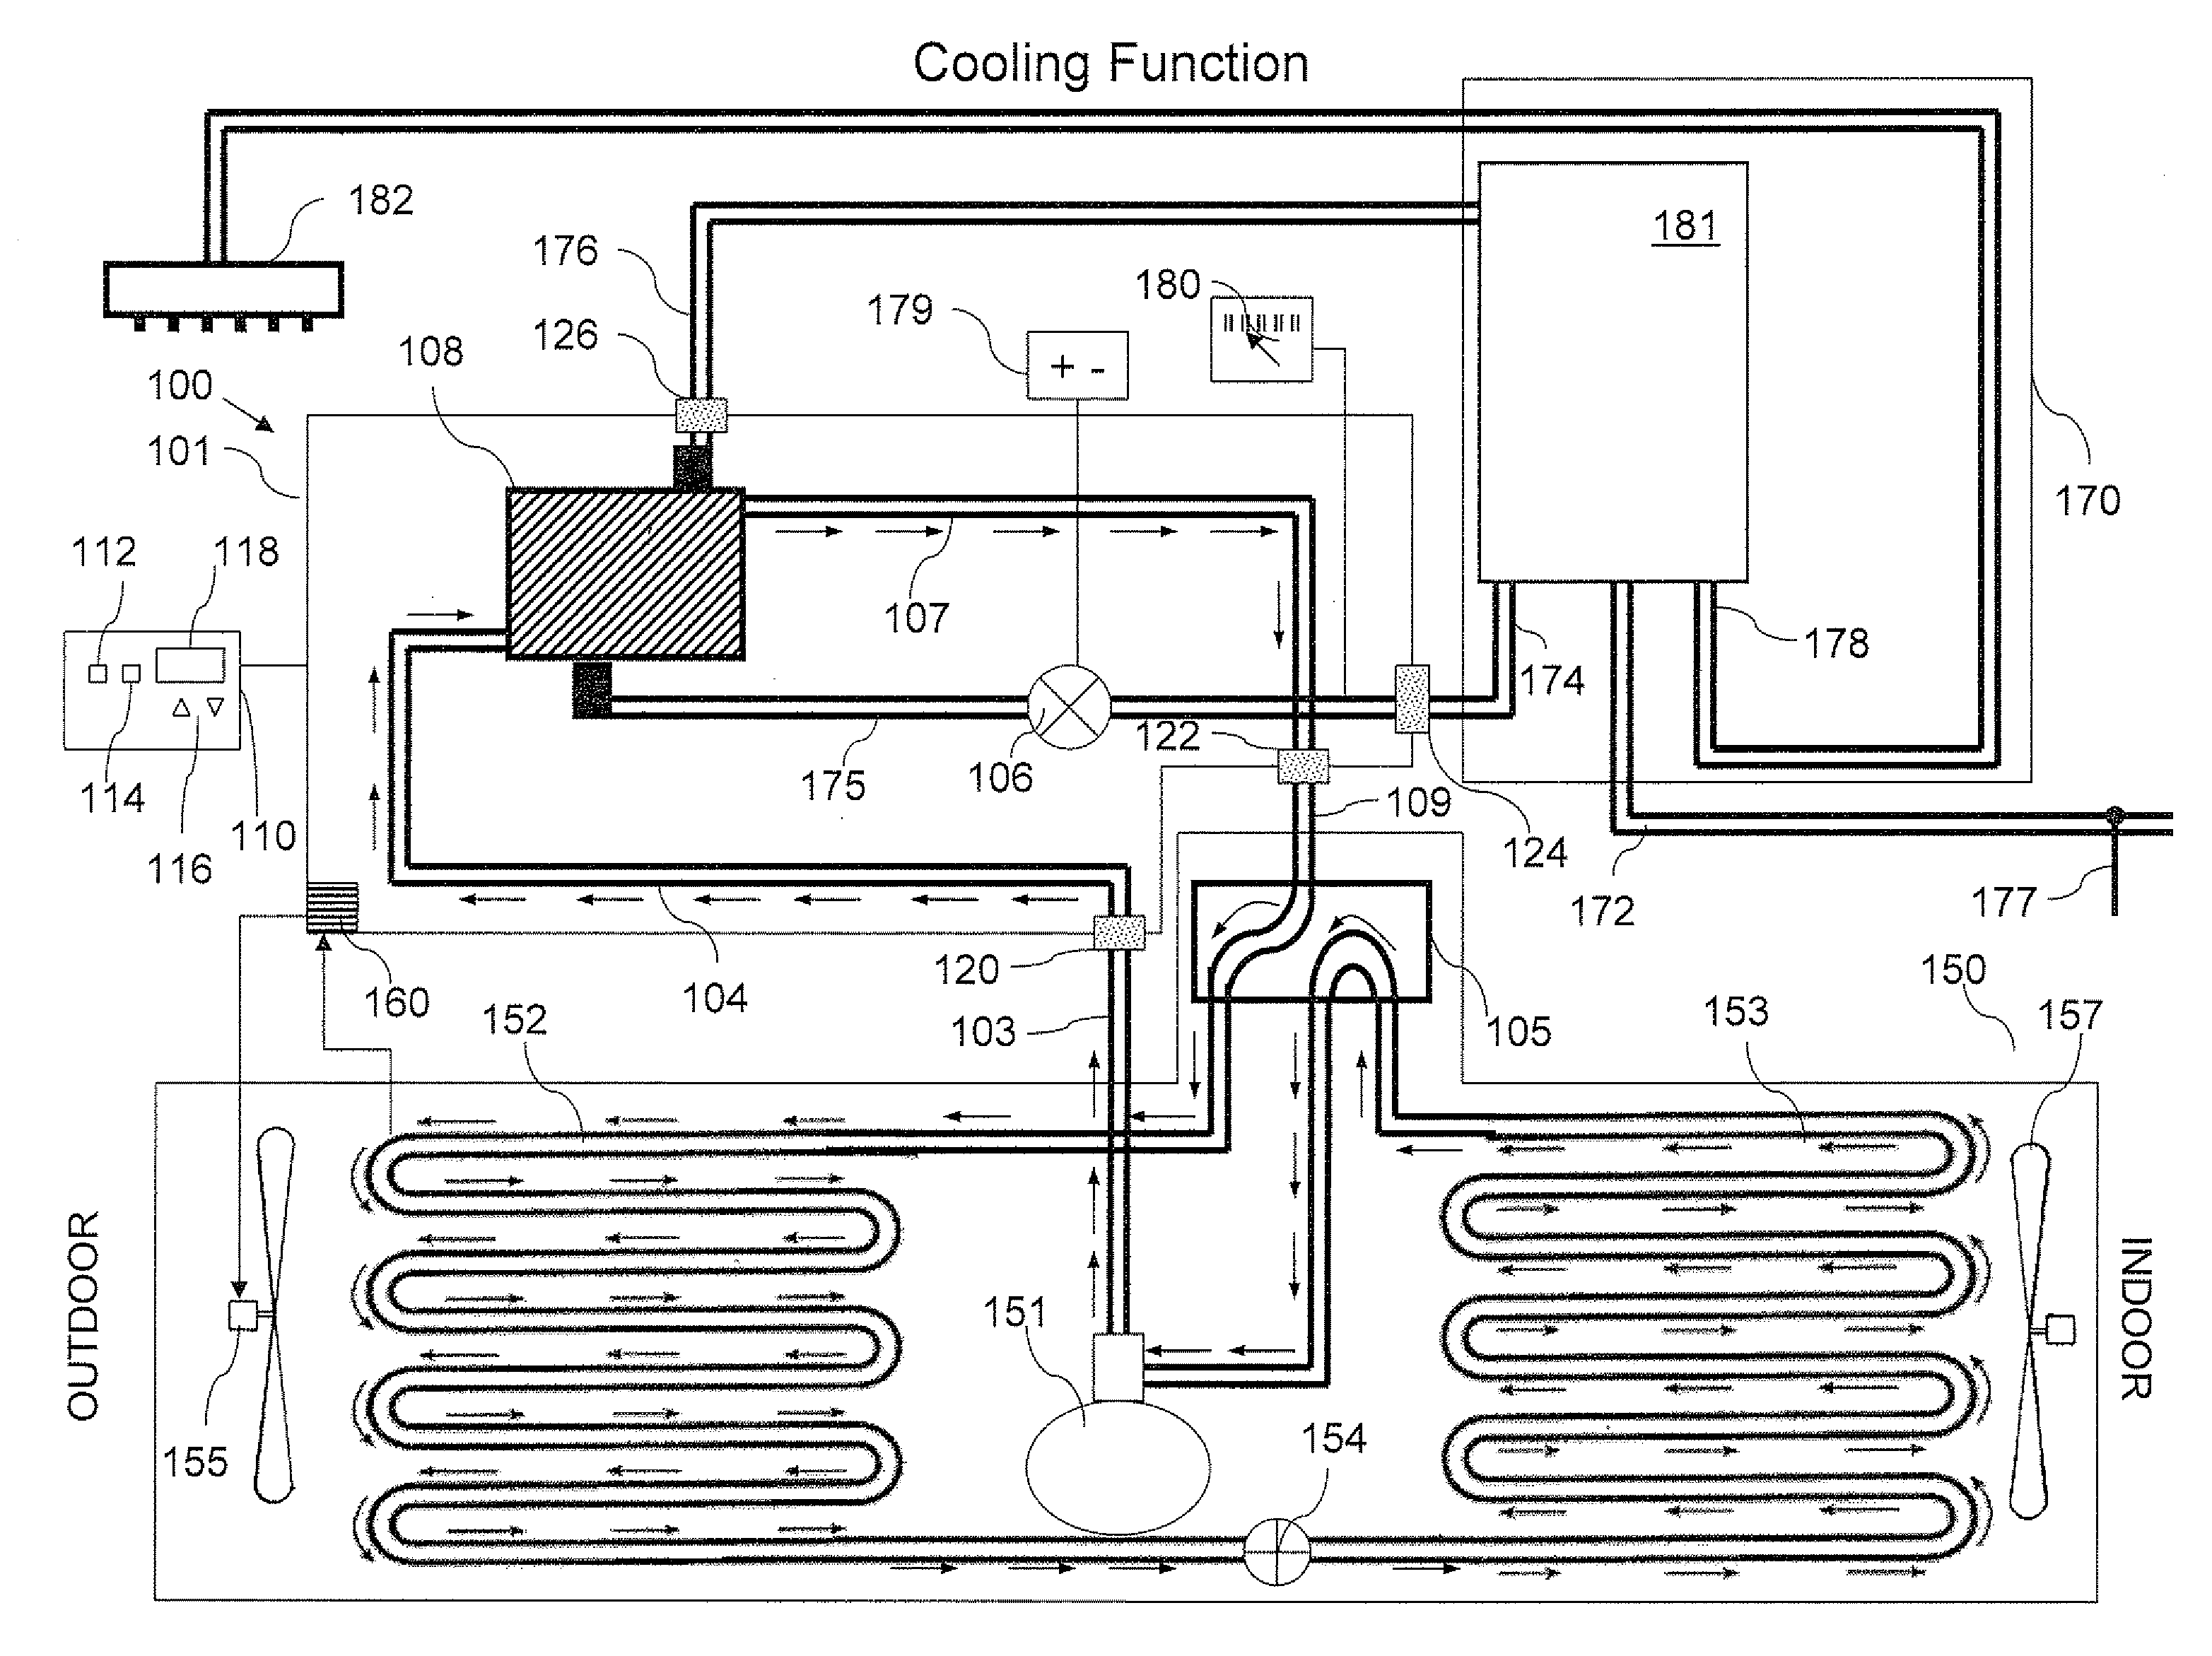 Apparatus for using cast-off heat to warm water from household water heater